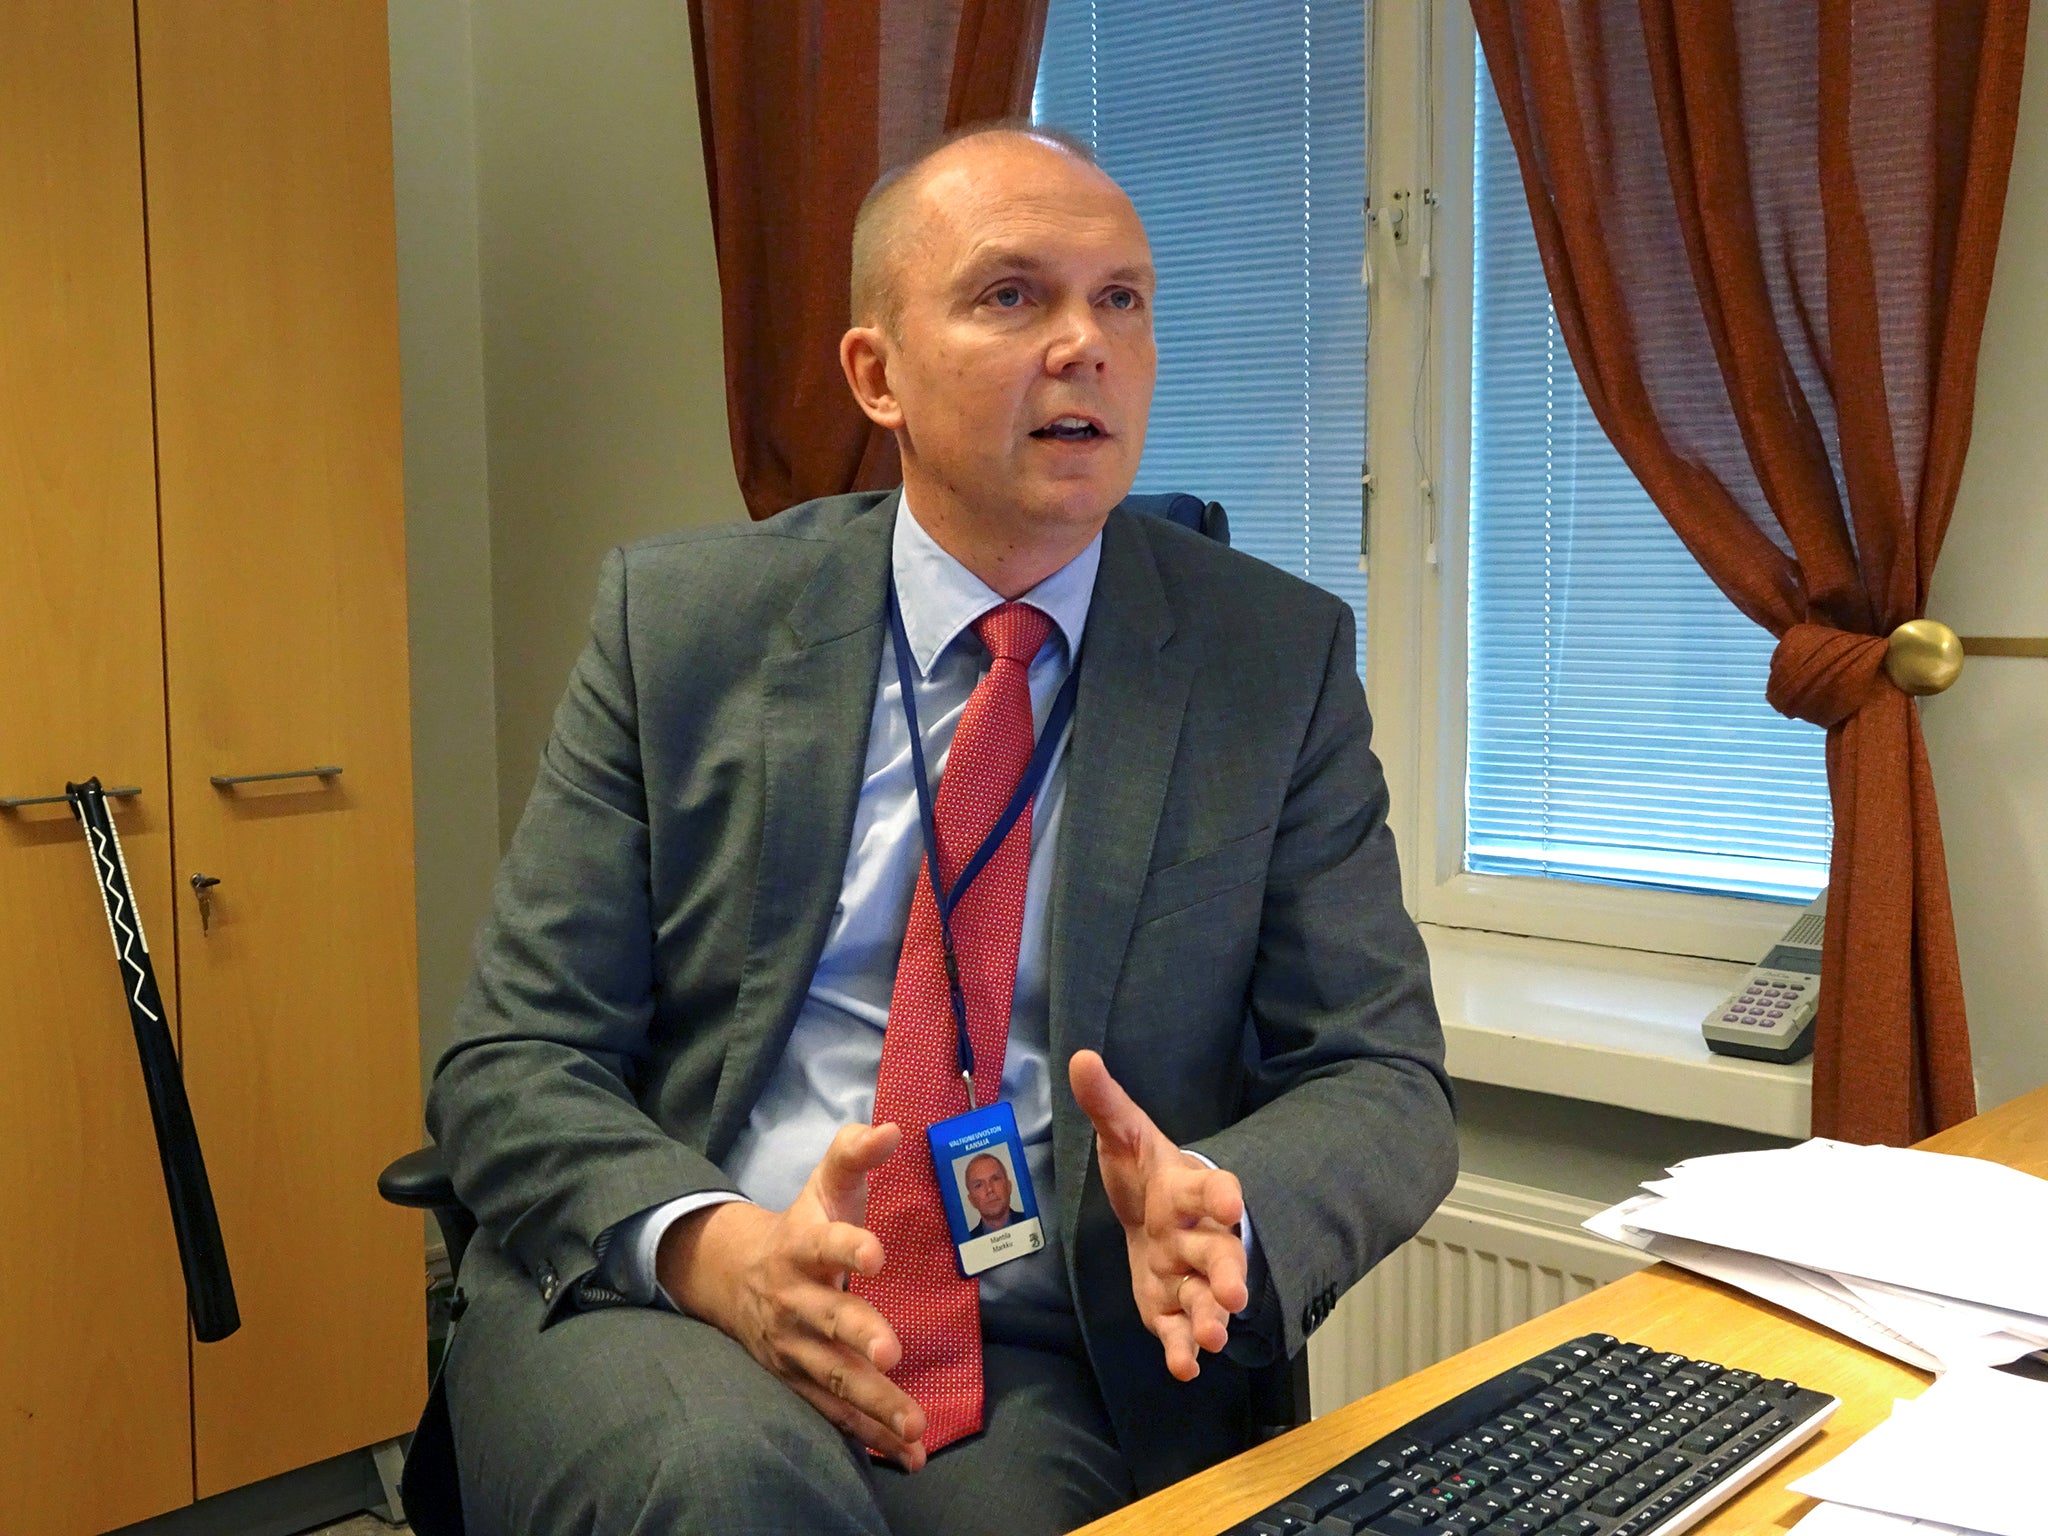 Head of the Finnish government's communication department Markku Mantila speaks at his office in Helsinki